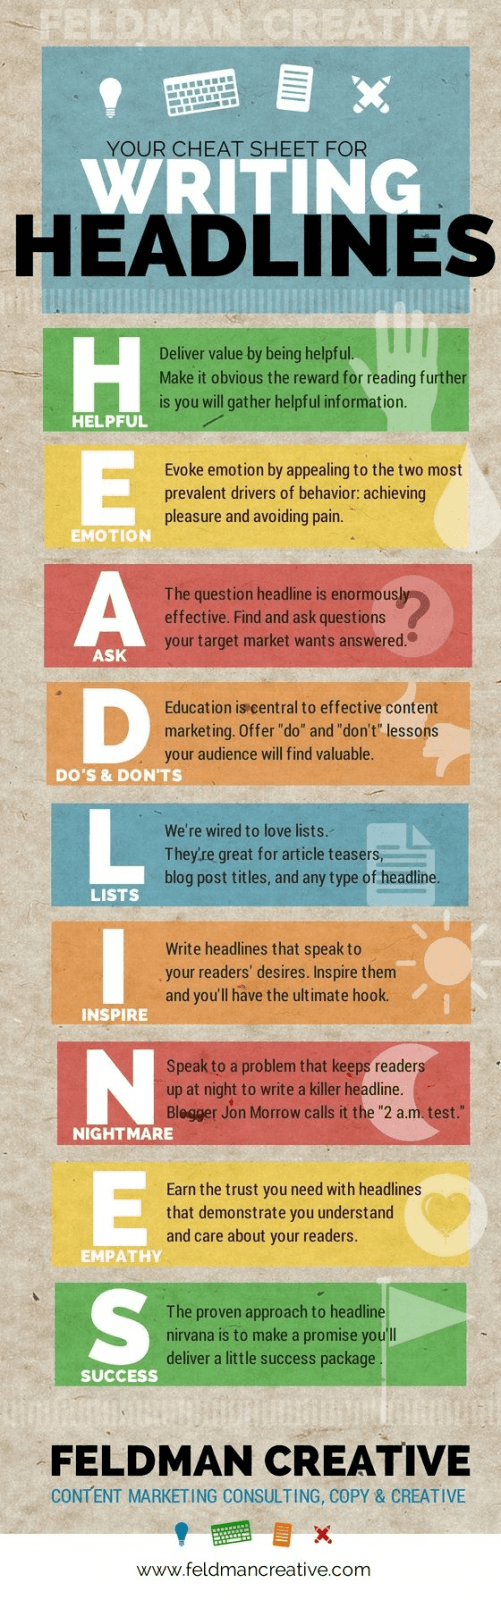 9 Steps to Writing Awesome Headlines [Infographic]